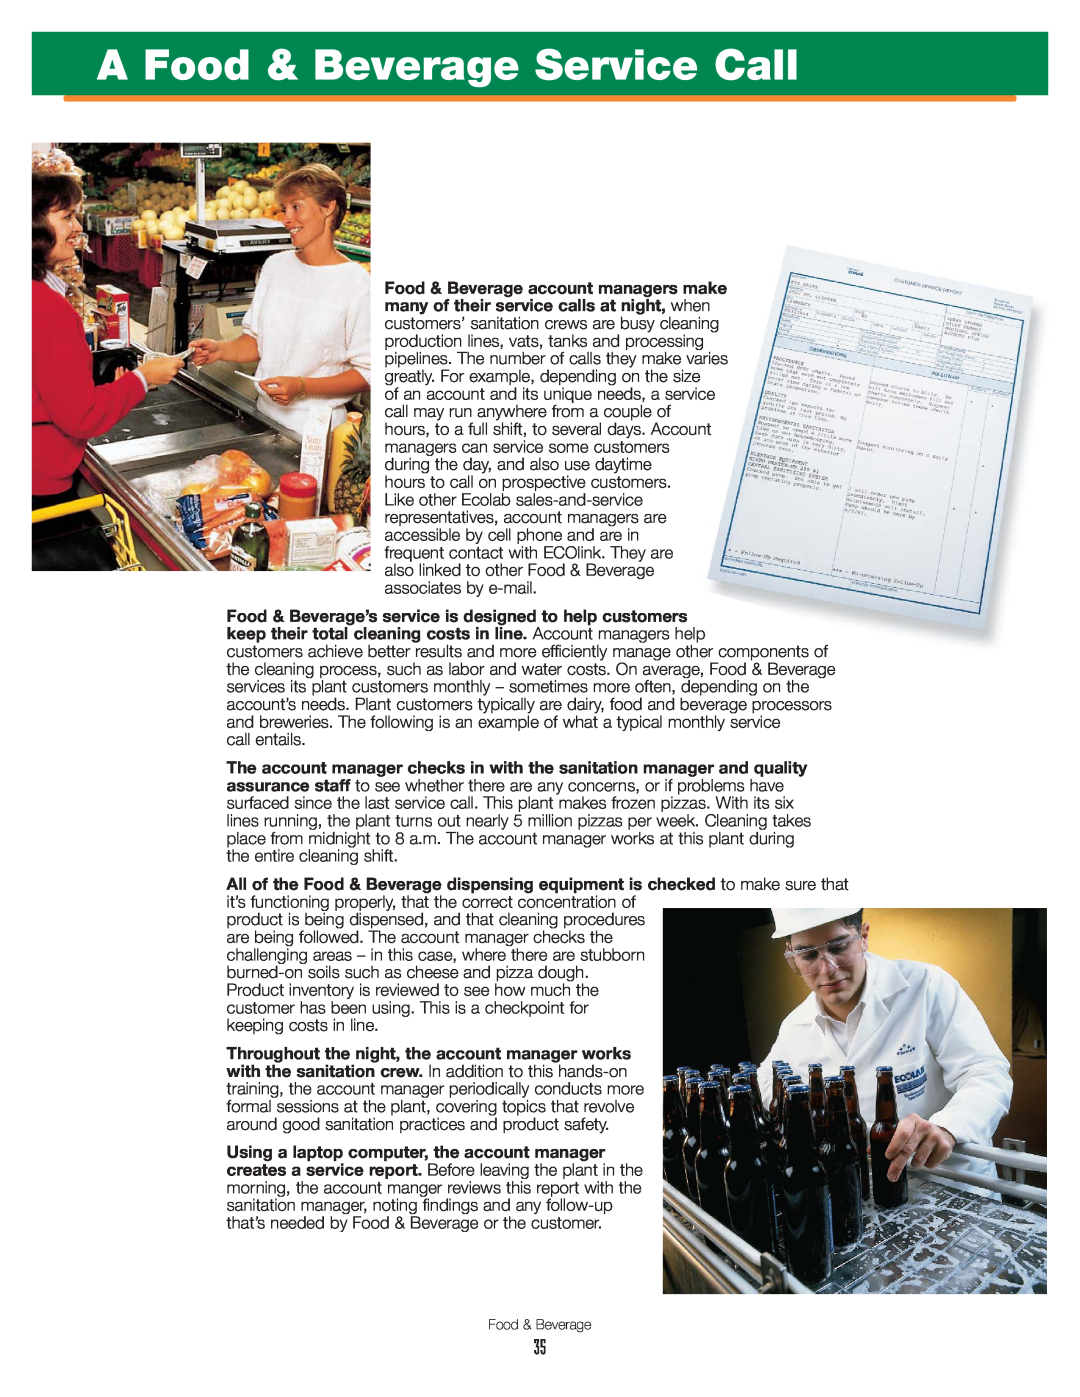 Anetsberger Brothers Food & Beverage Maker manual A Food & Beverage Service Call, call entails 